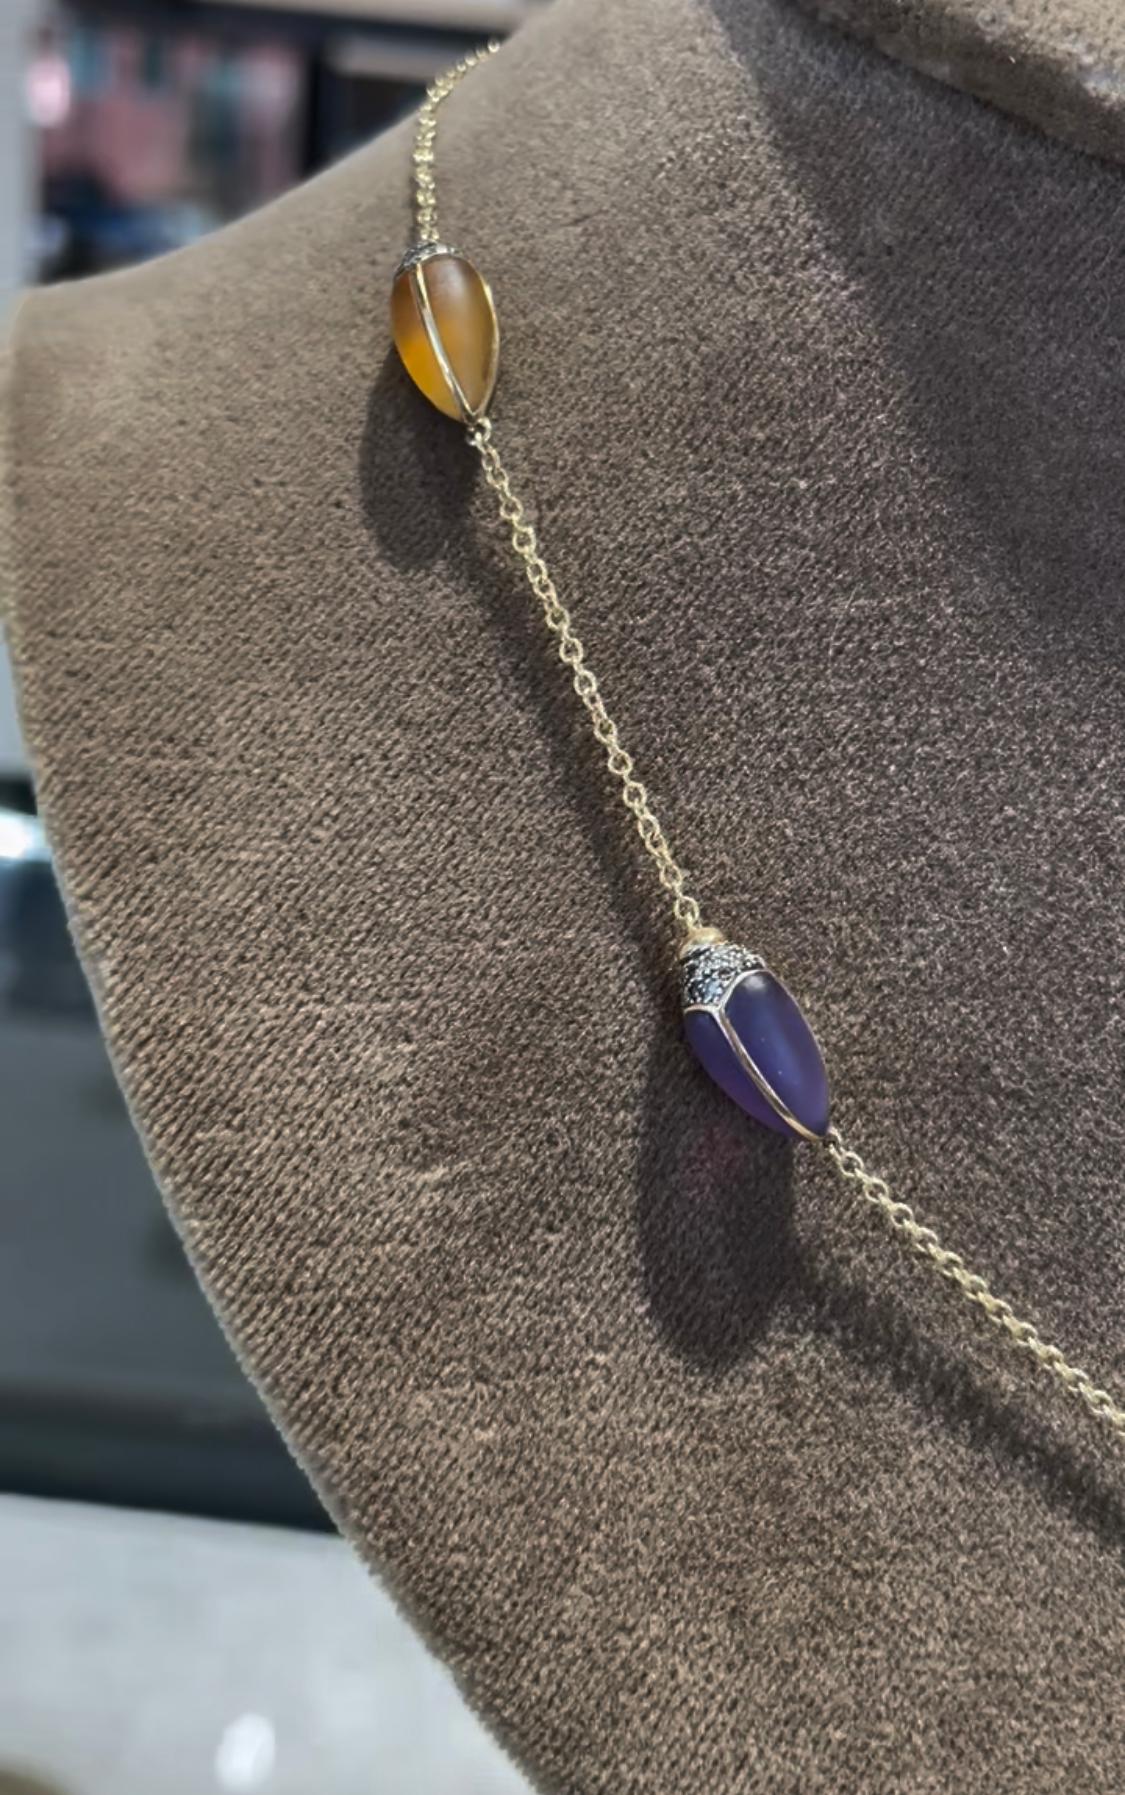 Inspired by the beauty of imperfection, Bibi van der Velden sculpts exotic materials into one of a kind jewelry evoking her respect for our natural world.

This necklace features a unique design with five scarabs with real scarab wings, diamonds,